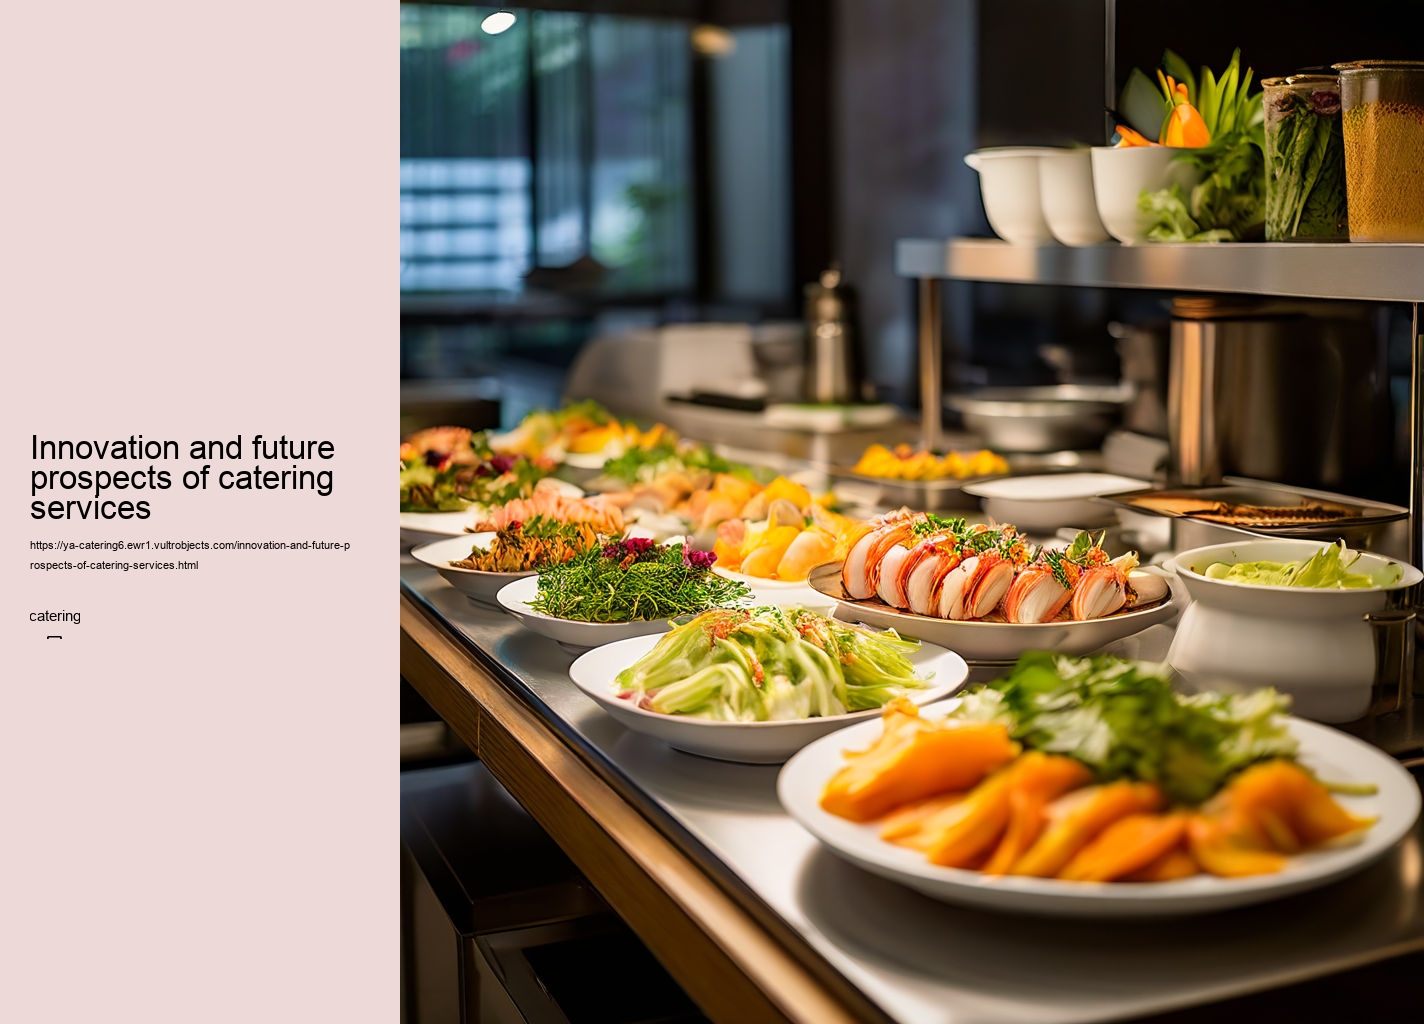 Innovation and future prospects of catering services